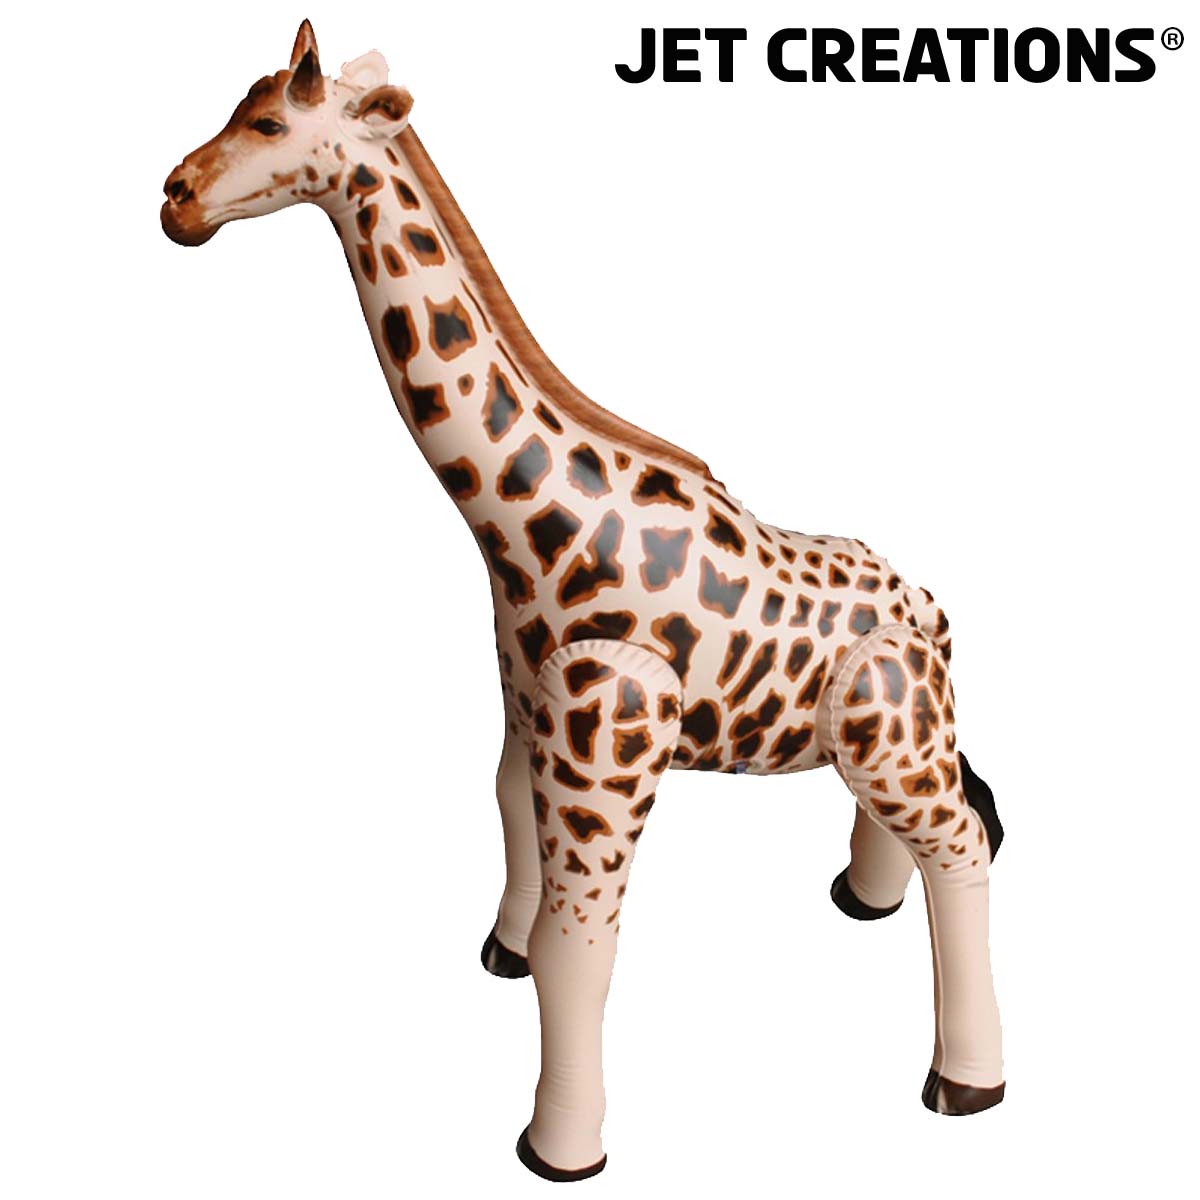 Jet Creations 3 pack Giraffe Zebra Lion safari Great for pool, party  decoration, [AN-GZL]